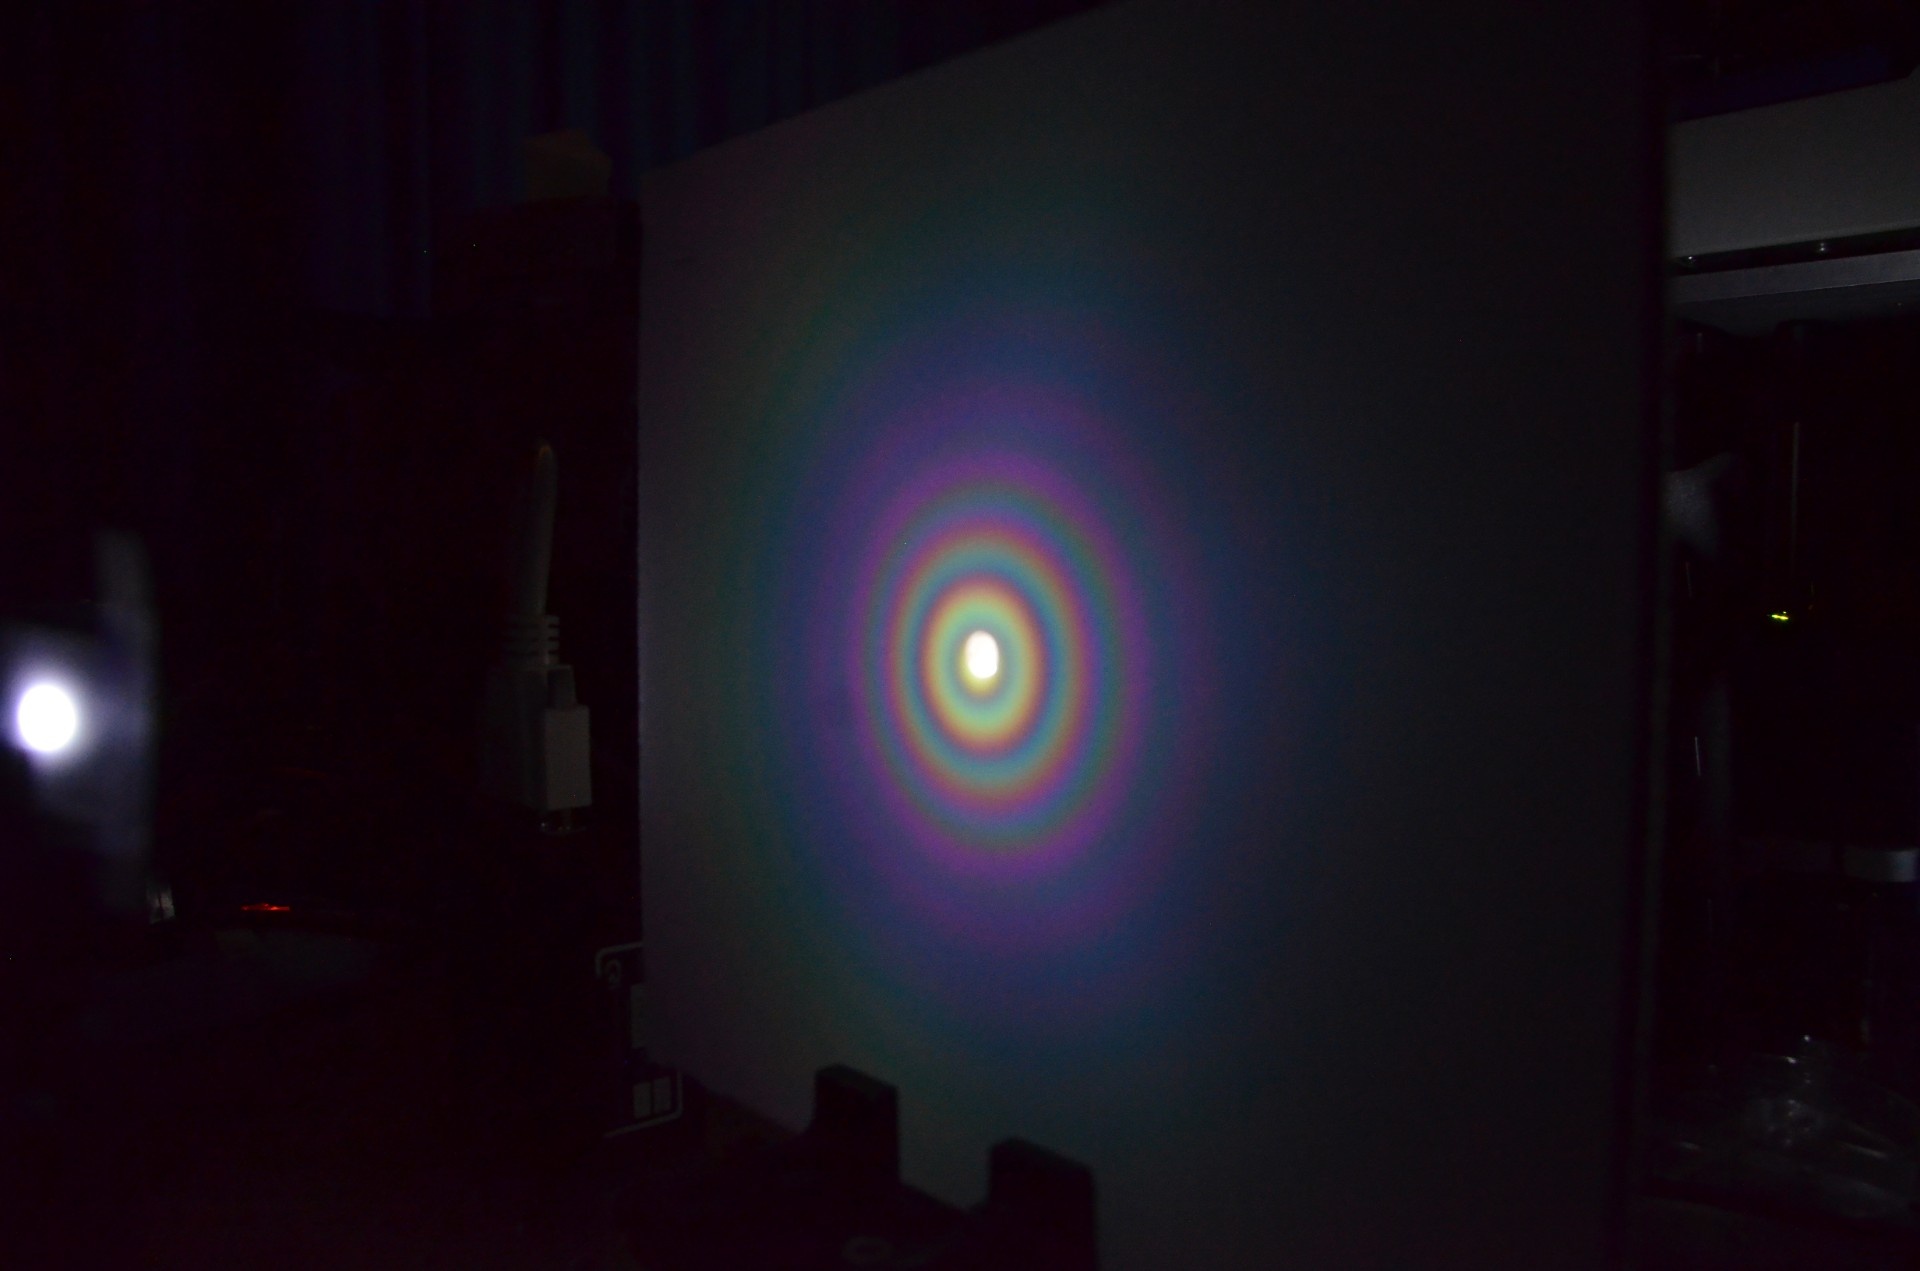 Concentric rainbows are produced when white light is reflected by microscale concave interfaces. This image shows the experimental set-up. (Credit: Jacob Rada)